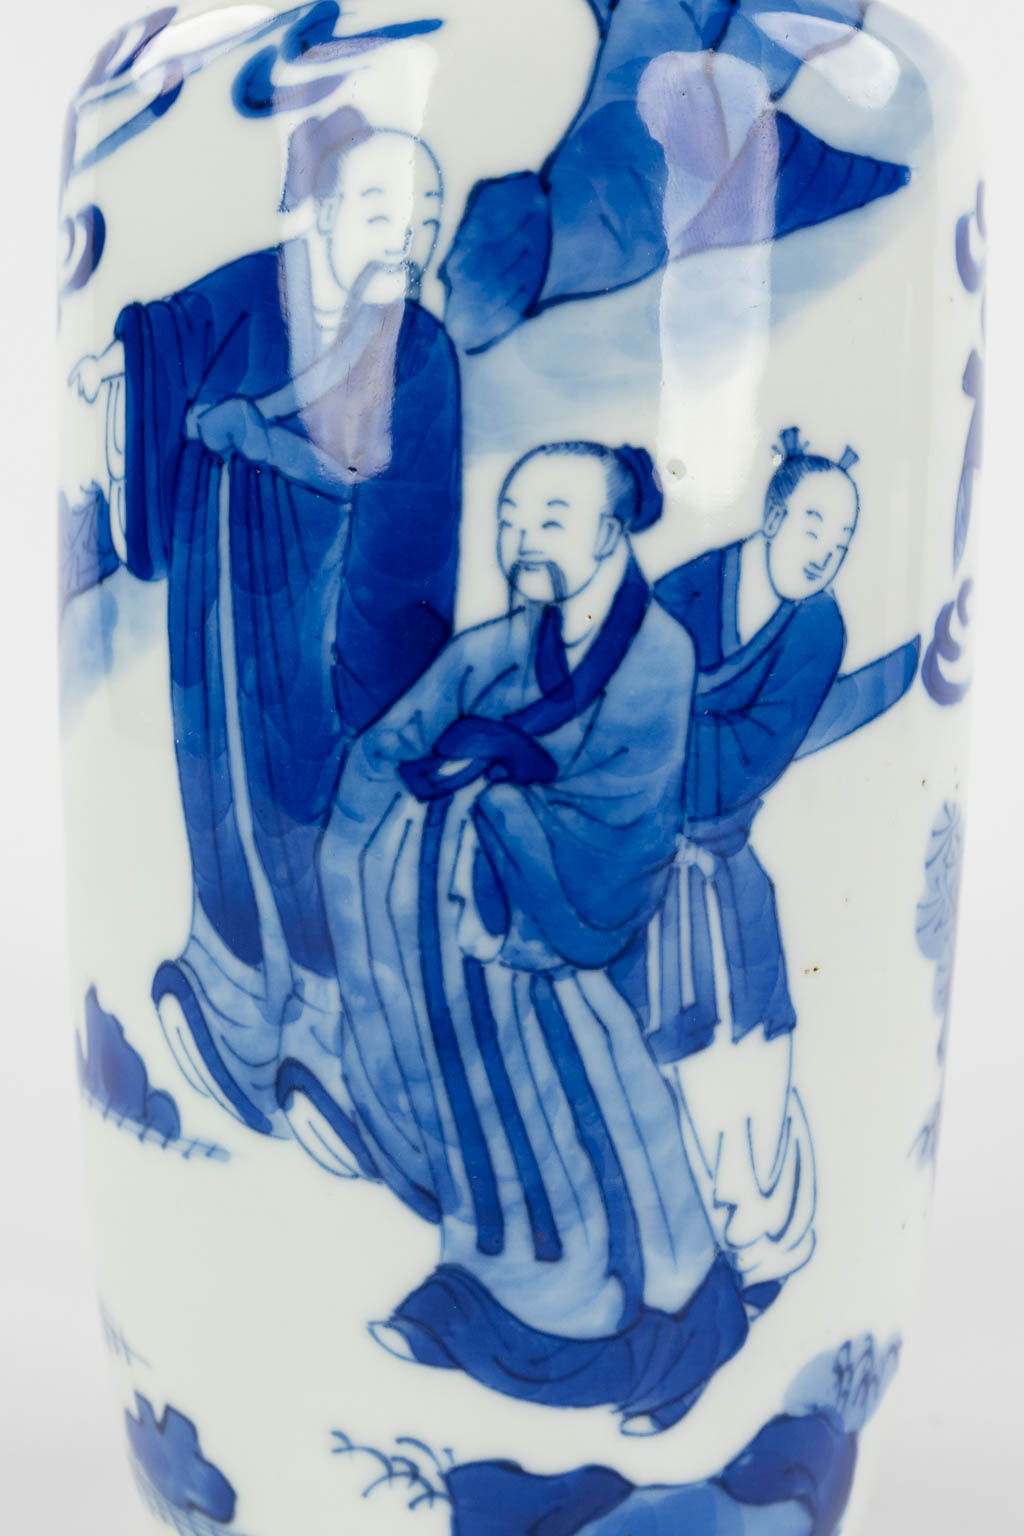 A Chinese vase decorated with blue-white figurines, Kangxi period. 18th C. (H:26 x D:10 cm) - Image 12 of 12